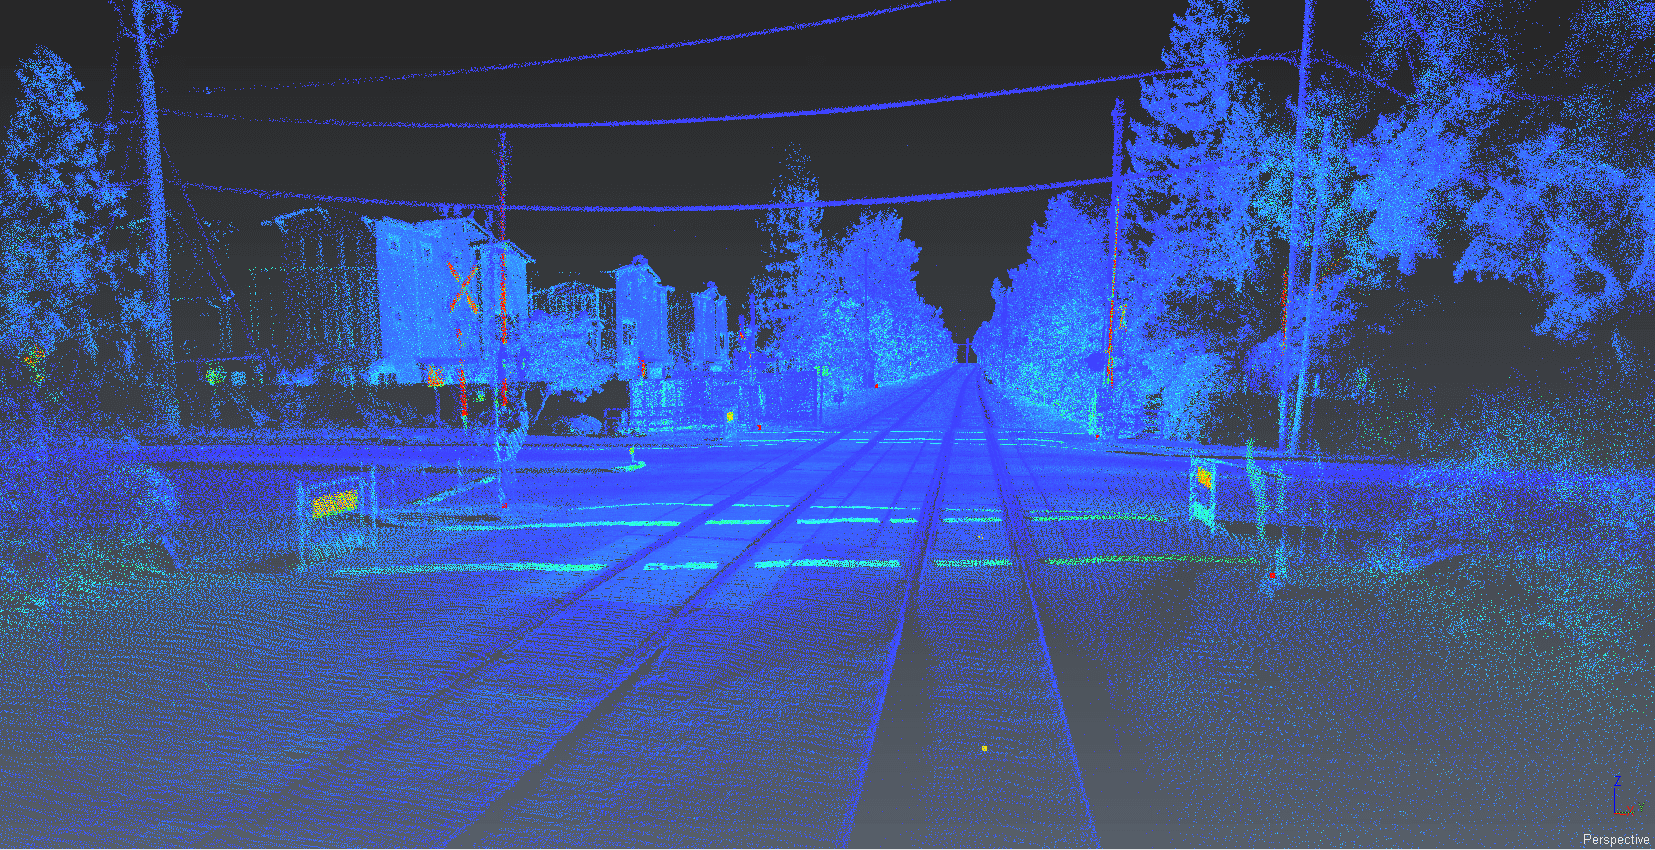 Mobile LiDAR Mapping